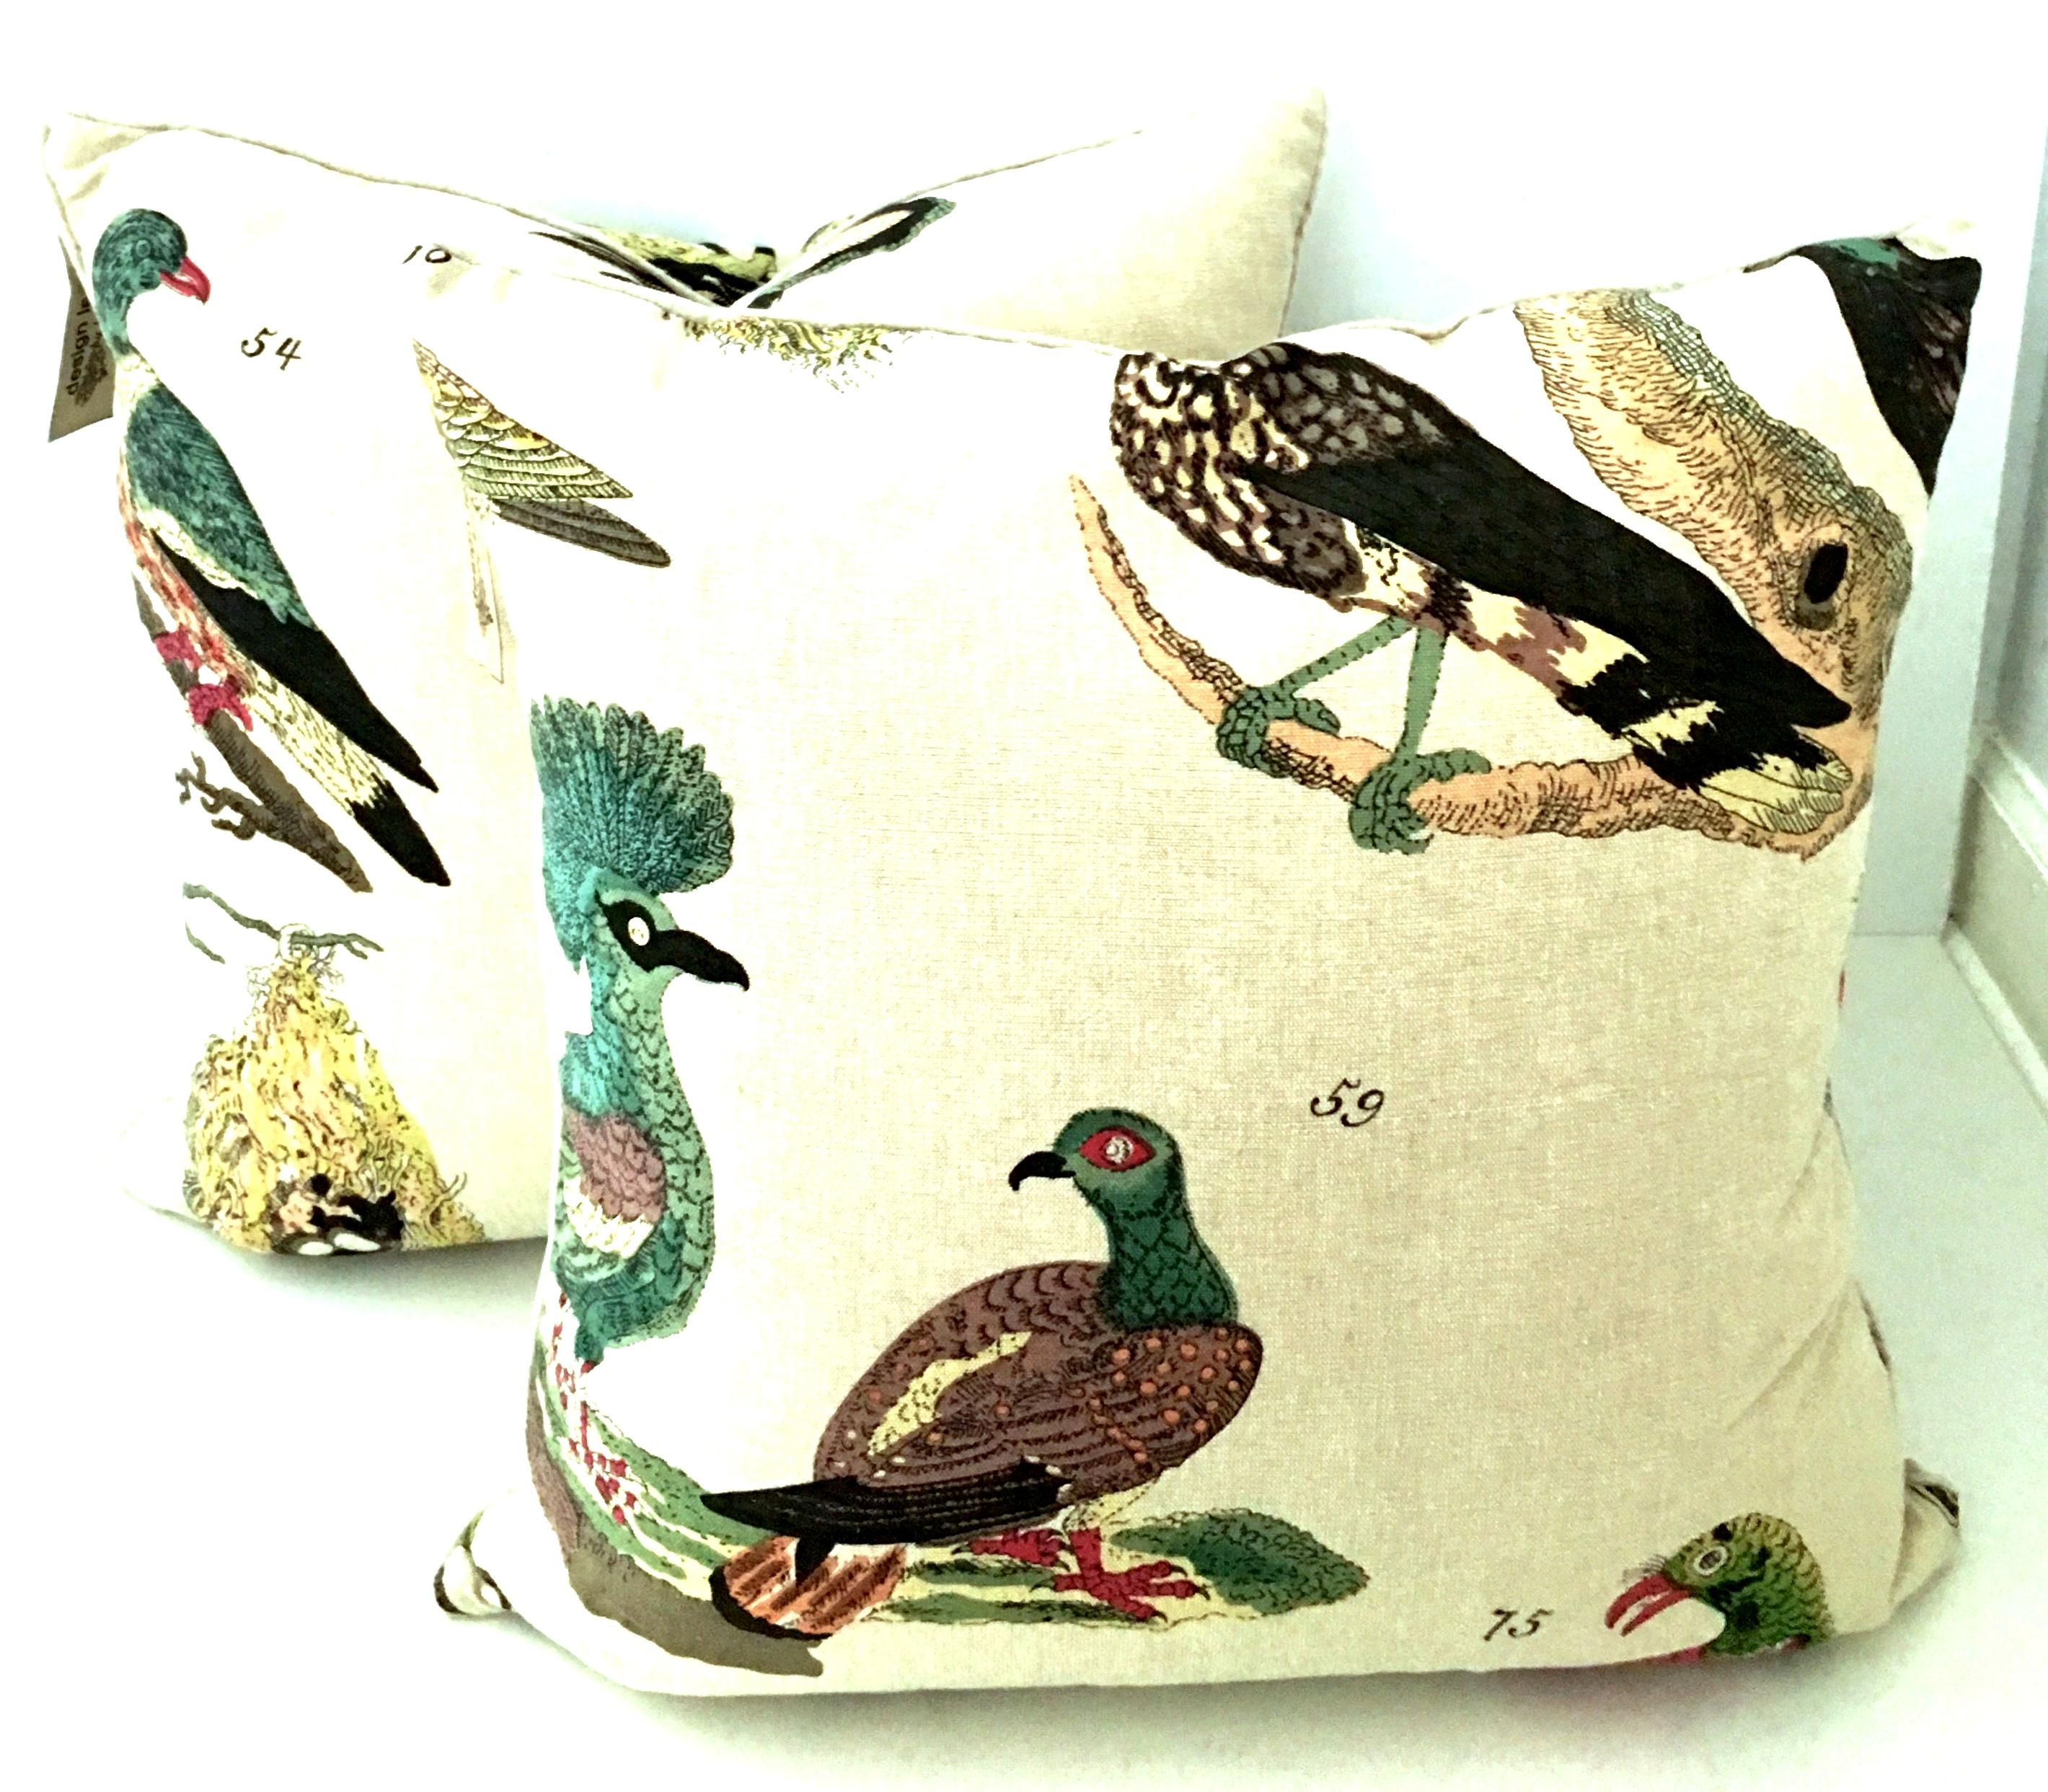 21st Century and new printed Belgium linen aviary down filled pillows by, Design Legacy. These lovely printed Belgium linen pillows feature a bird or aviary motif with hidden zipper for easy removal. Each pillow includes a cotton covered down filled